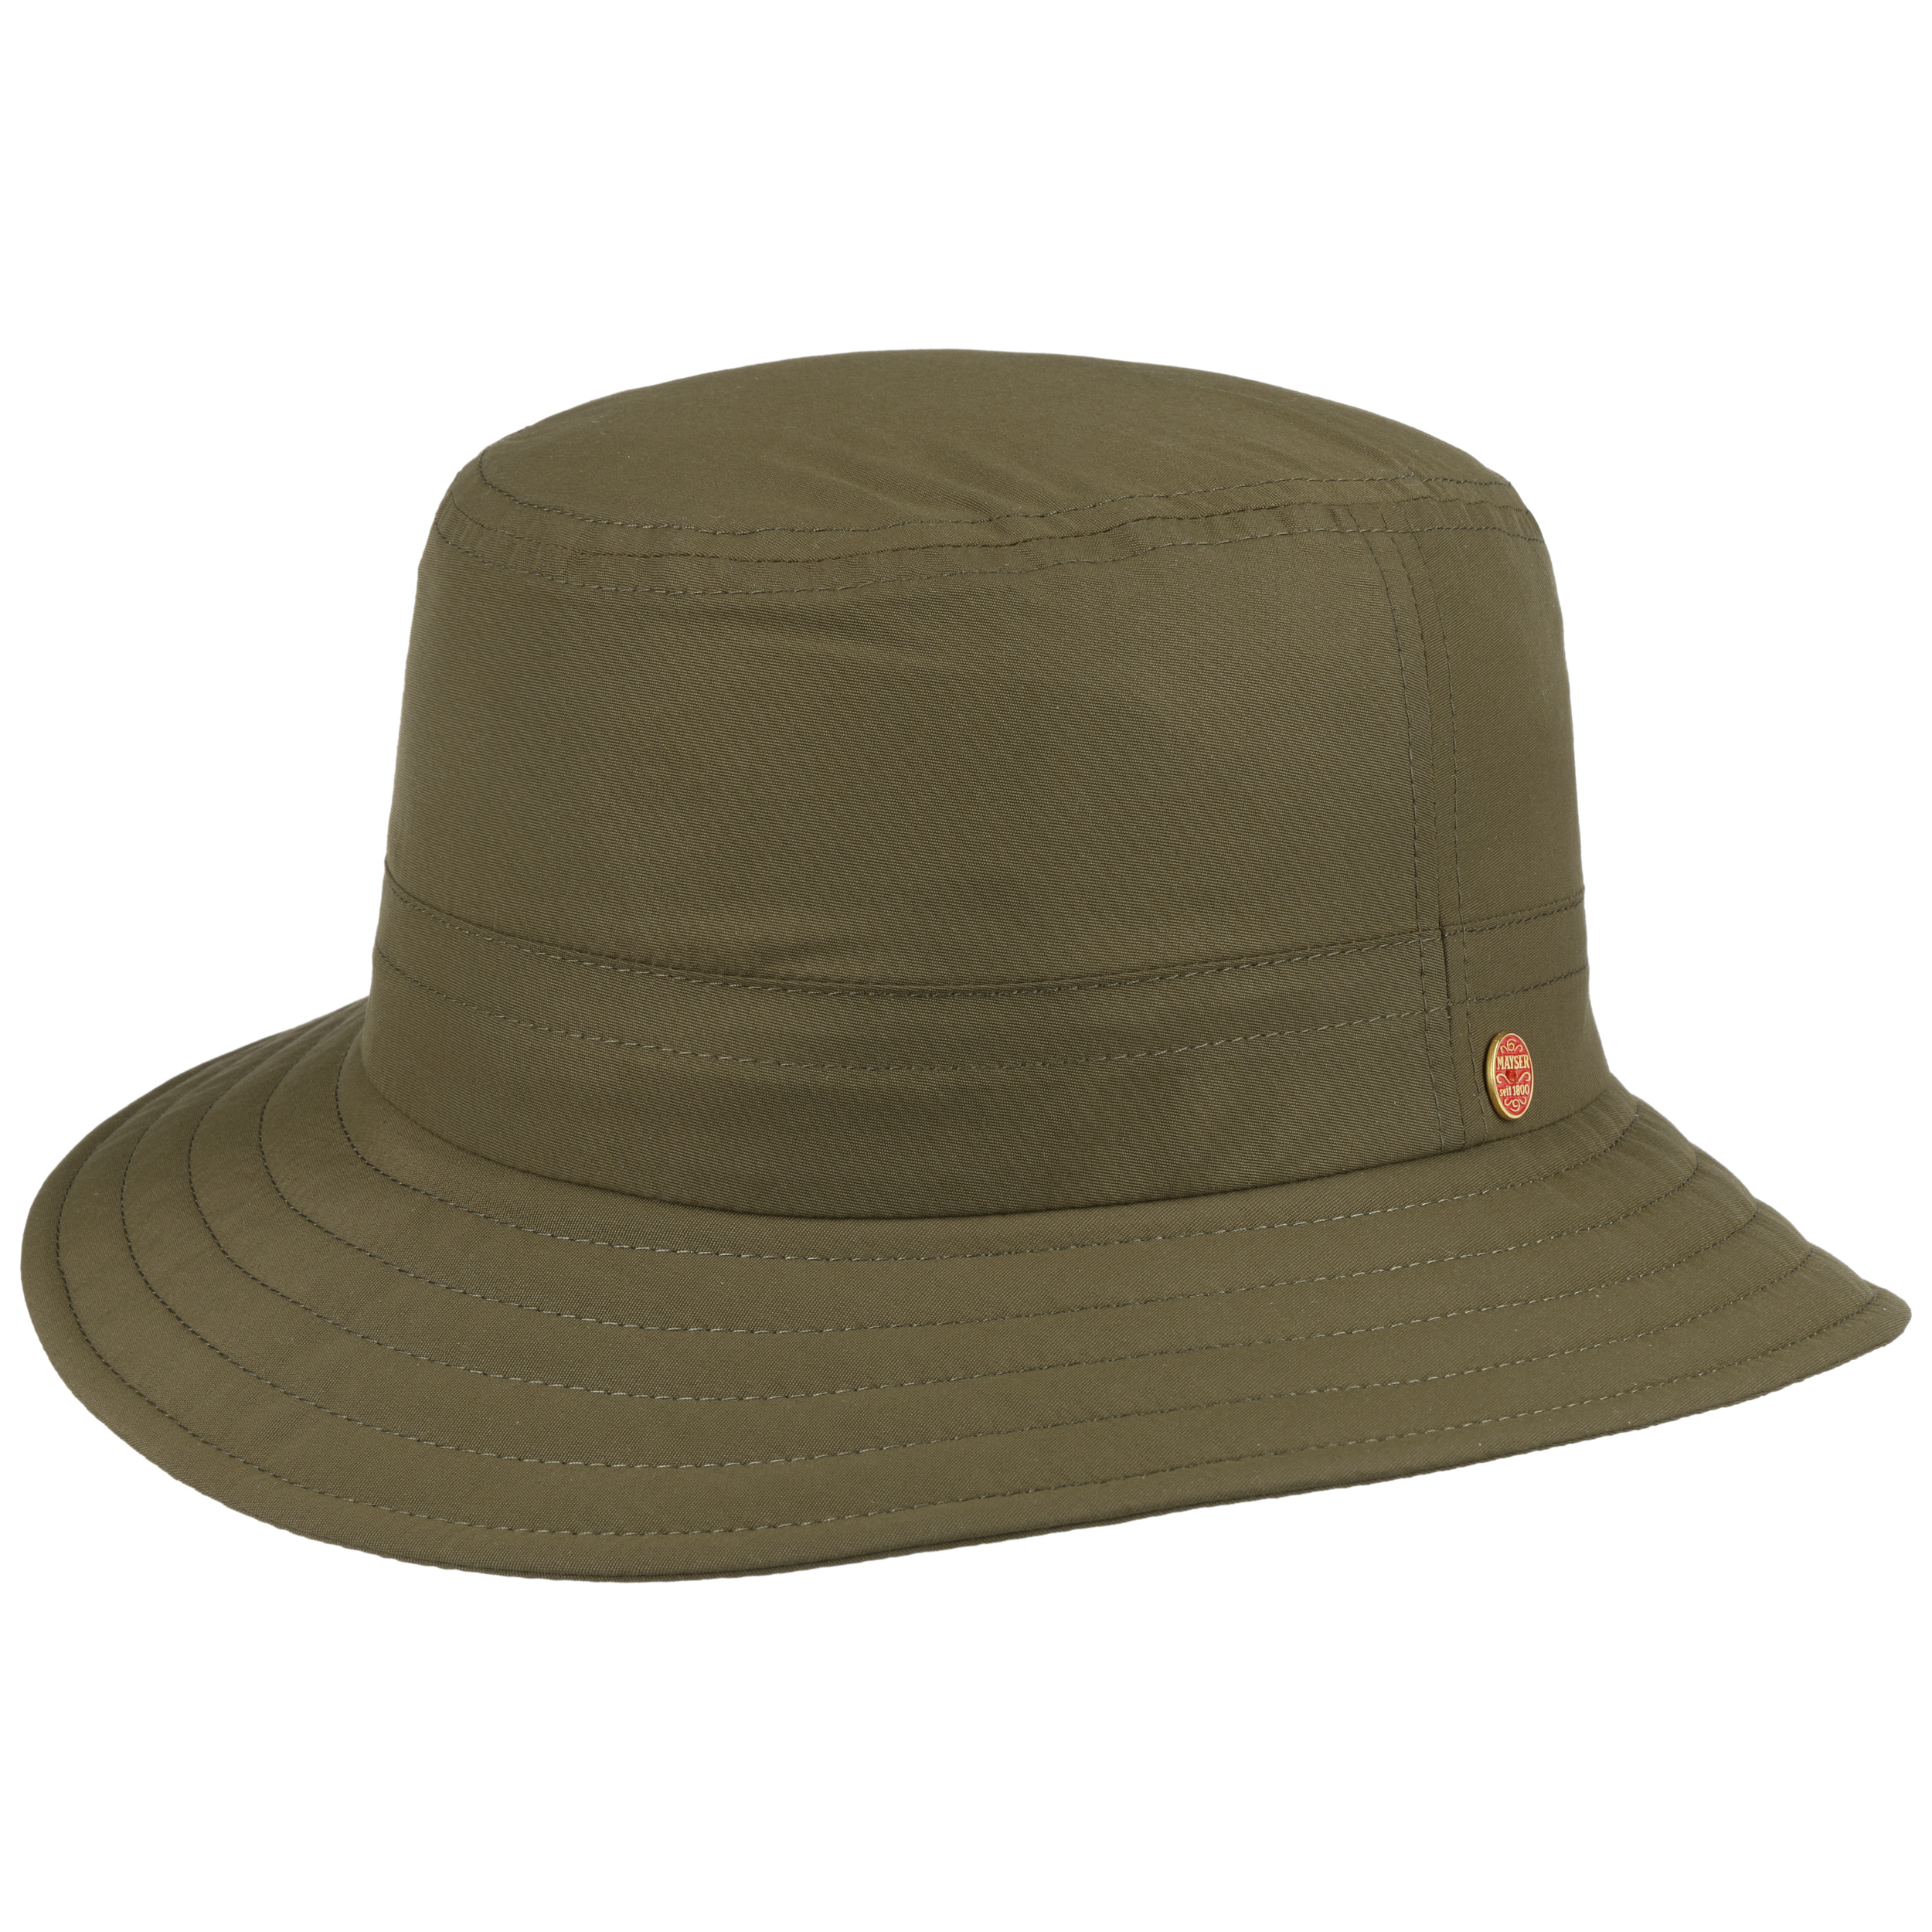 UV Protection Sun Hat by Mayser - 72,95 €